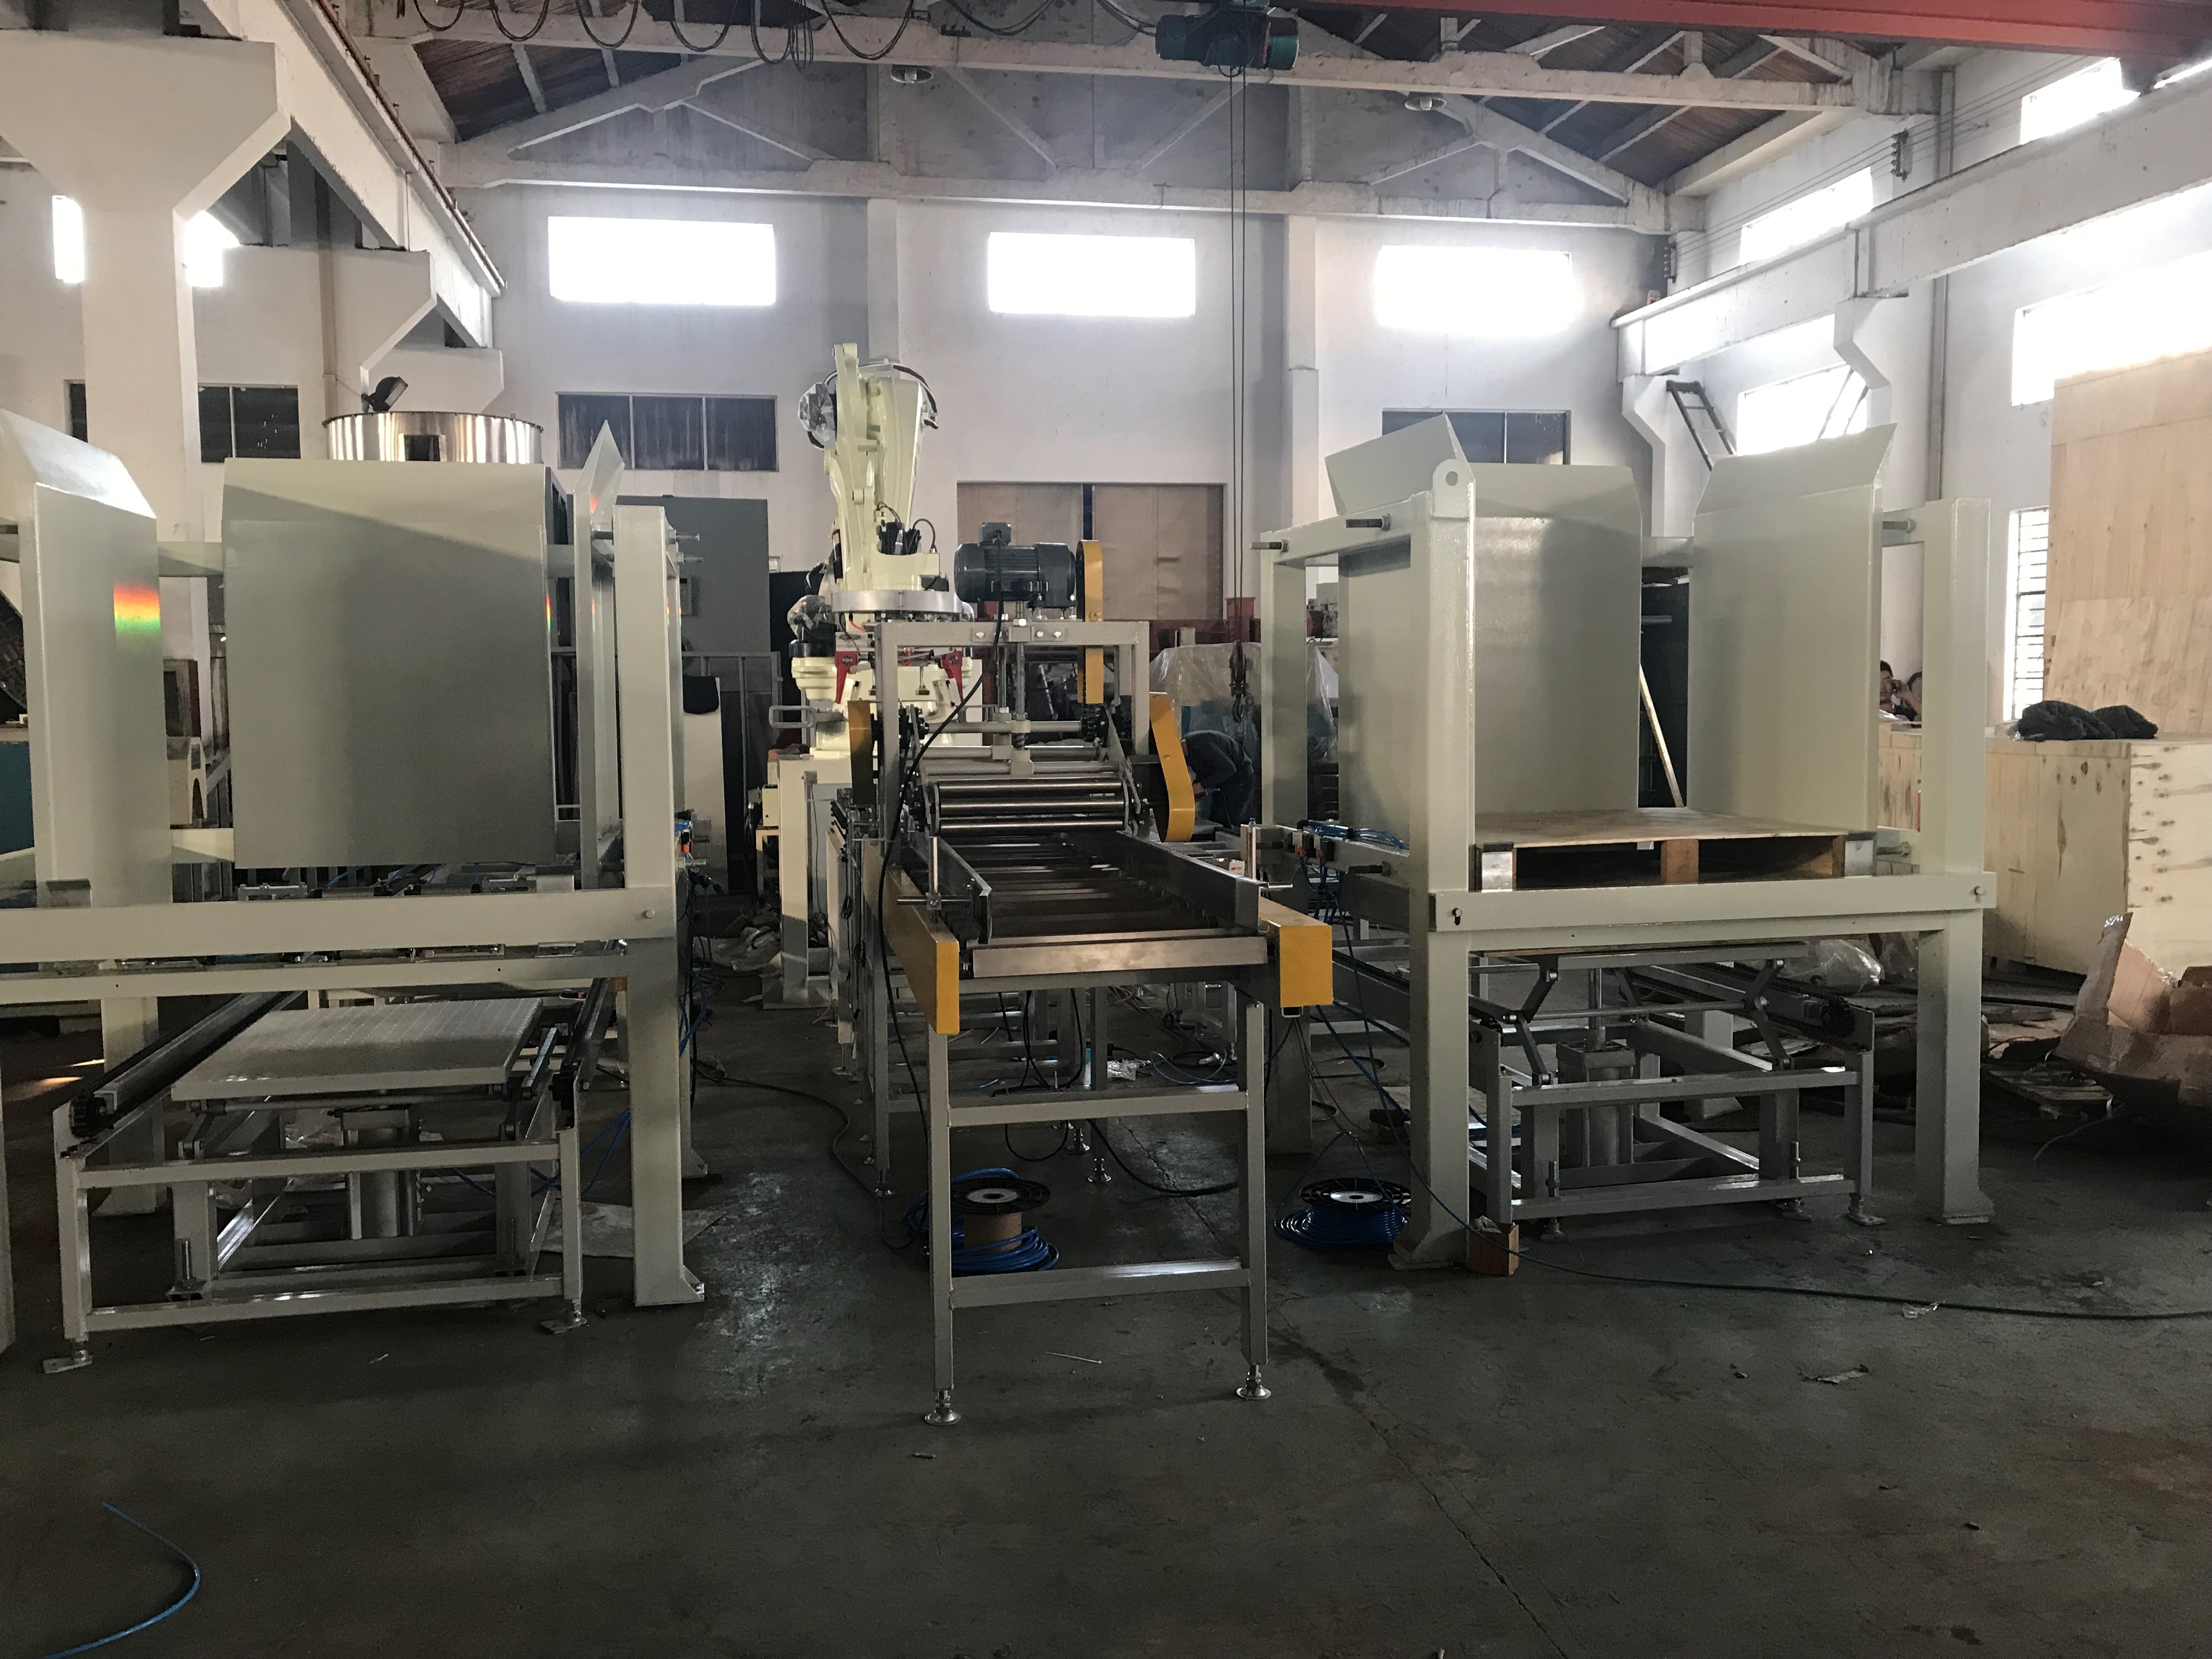 Fully Automatic Packing & Palletizing Line Fully Automatic Packing Palletizing Line Fully Automatic Packing Line Fully Automatic Bagging Line Fully Automatic filling and packaging line automated baggi